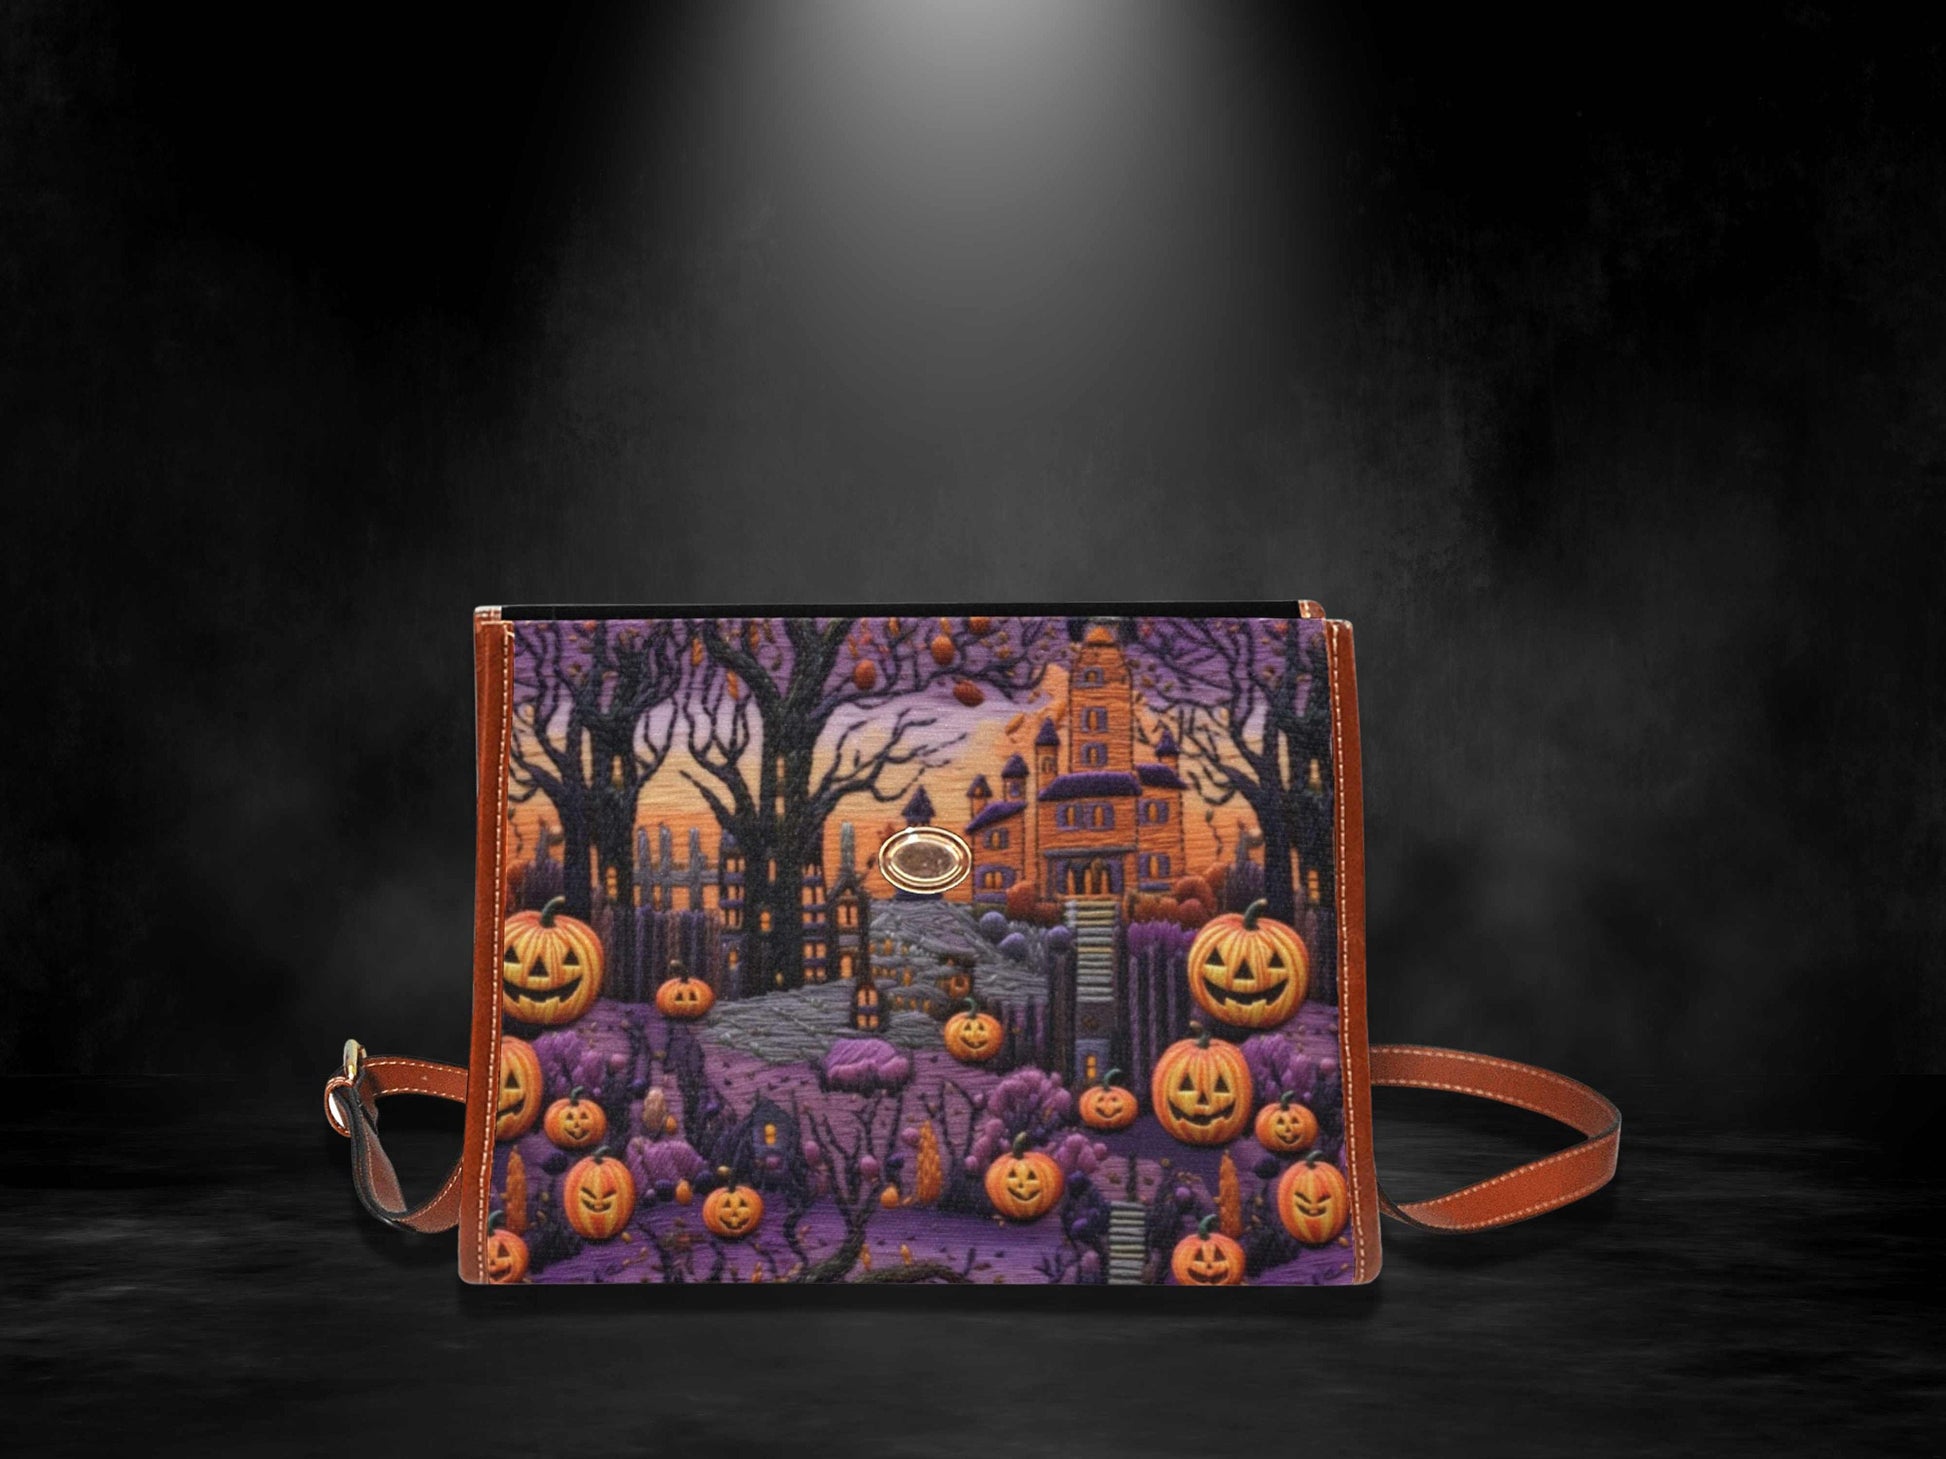 Canvas Embroidered Halloween Bag Haunted House October Crossbody Pumpkin Spice Gift for Witchy Lovers Weekender Bag Women Weekend Bag